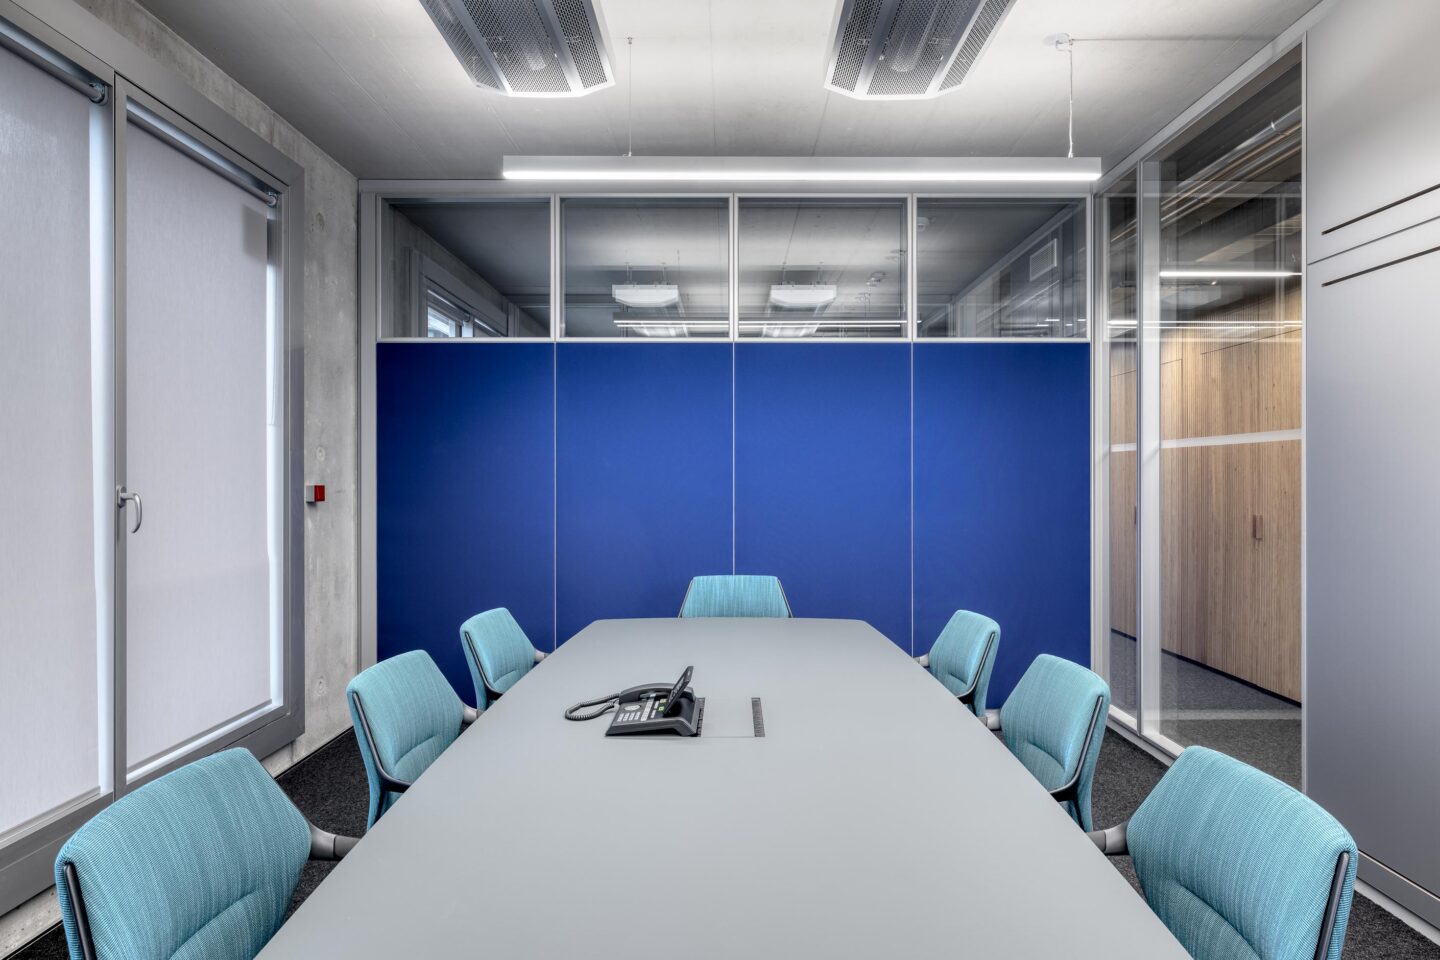 The solid wall panels are designed with object fabrics and contribute to the room acoustics. The textile wall surfaces in different colours provide orientation.